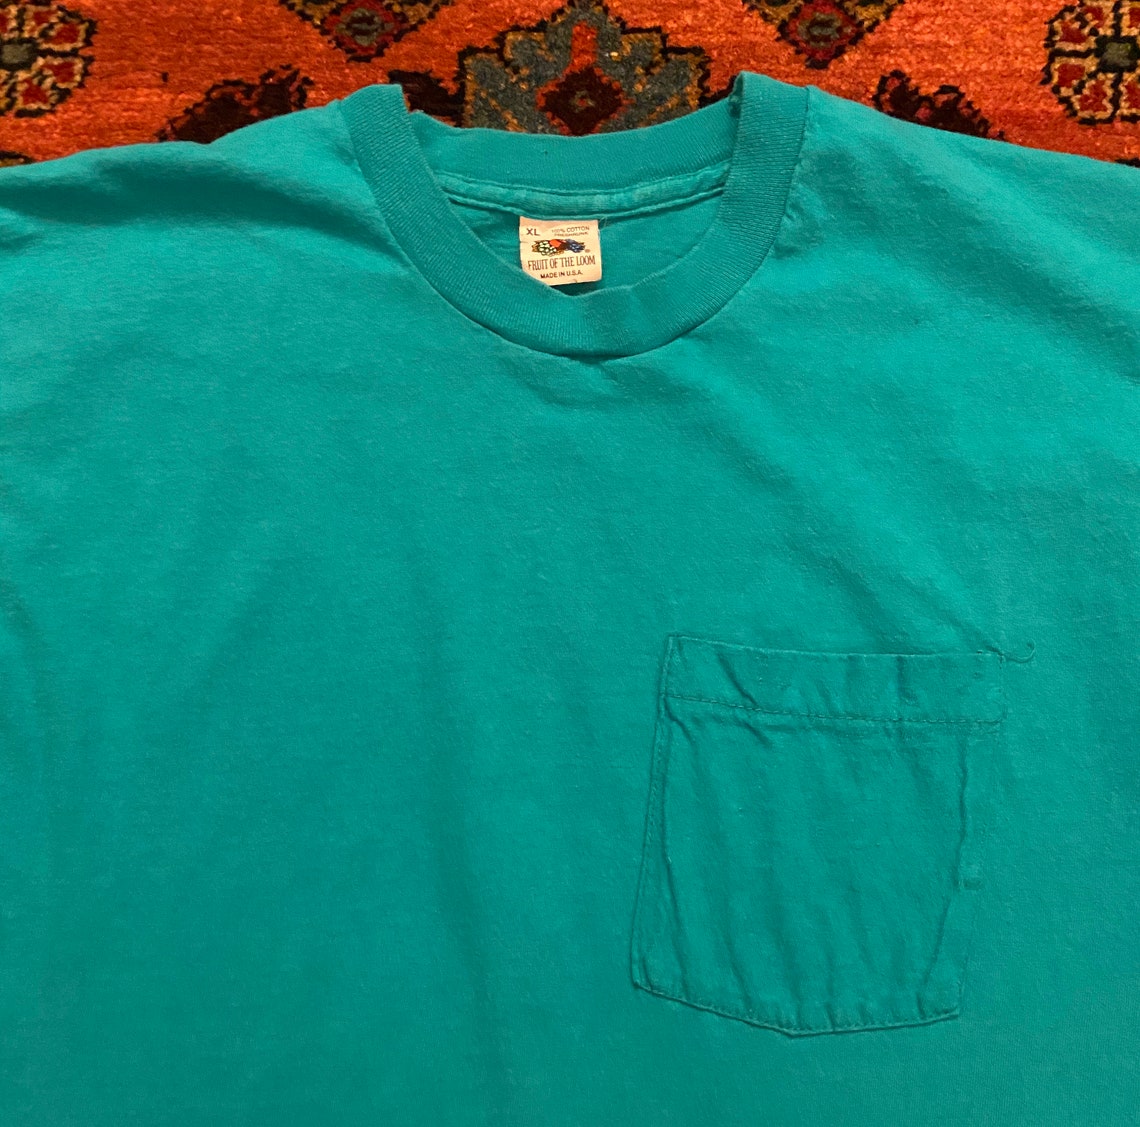 Vintage 1980s Fruit of the Loom Teal All Cotton Pocket T-Shirt | Etsy